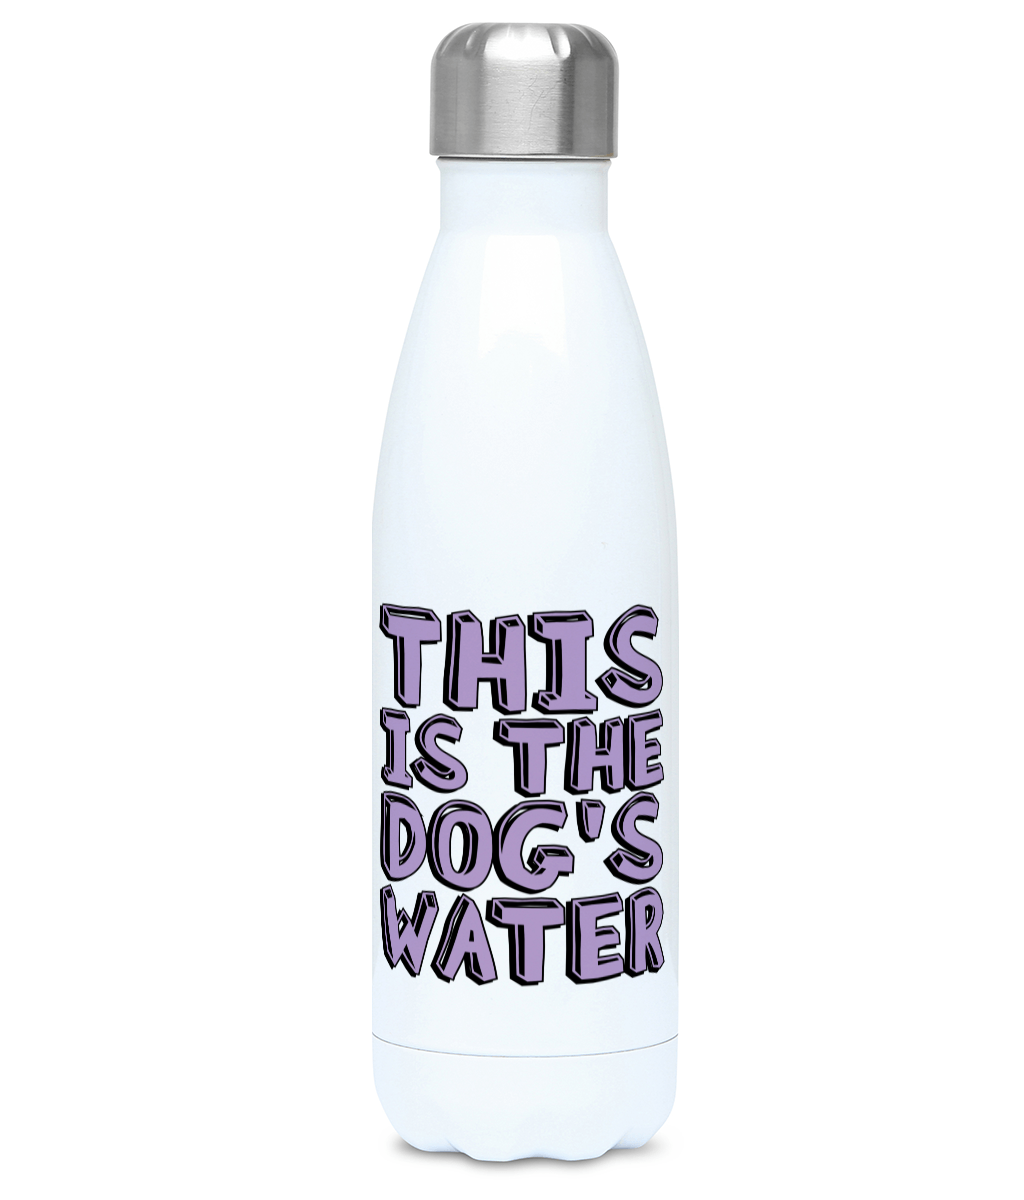 this is the dog's water bottle